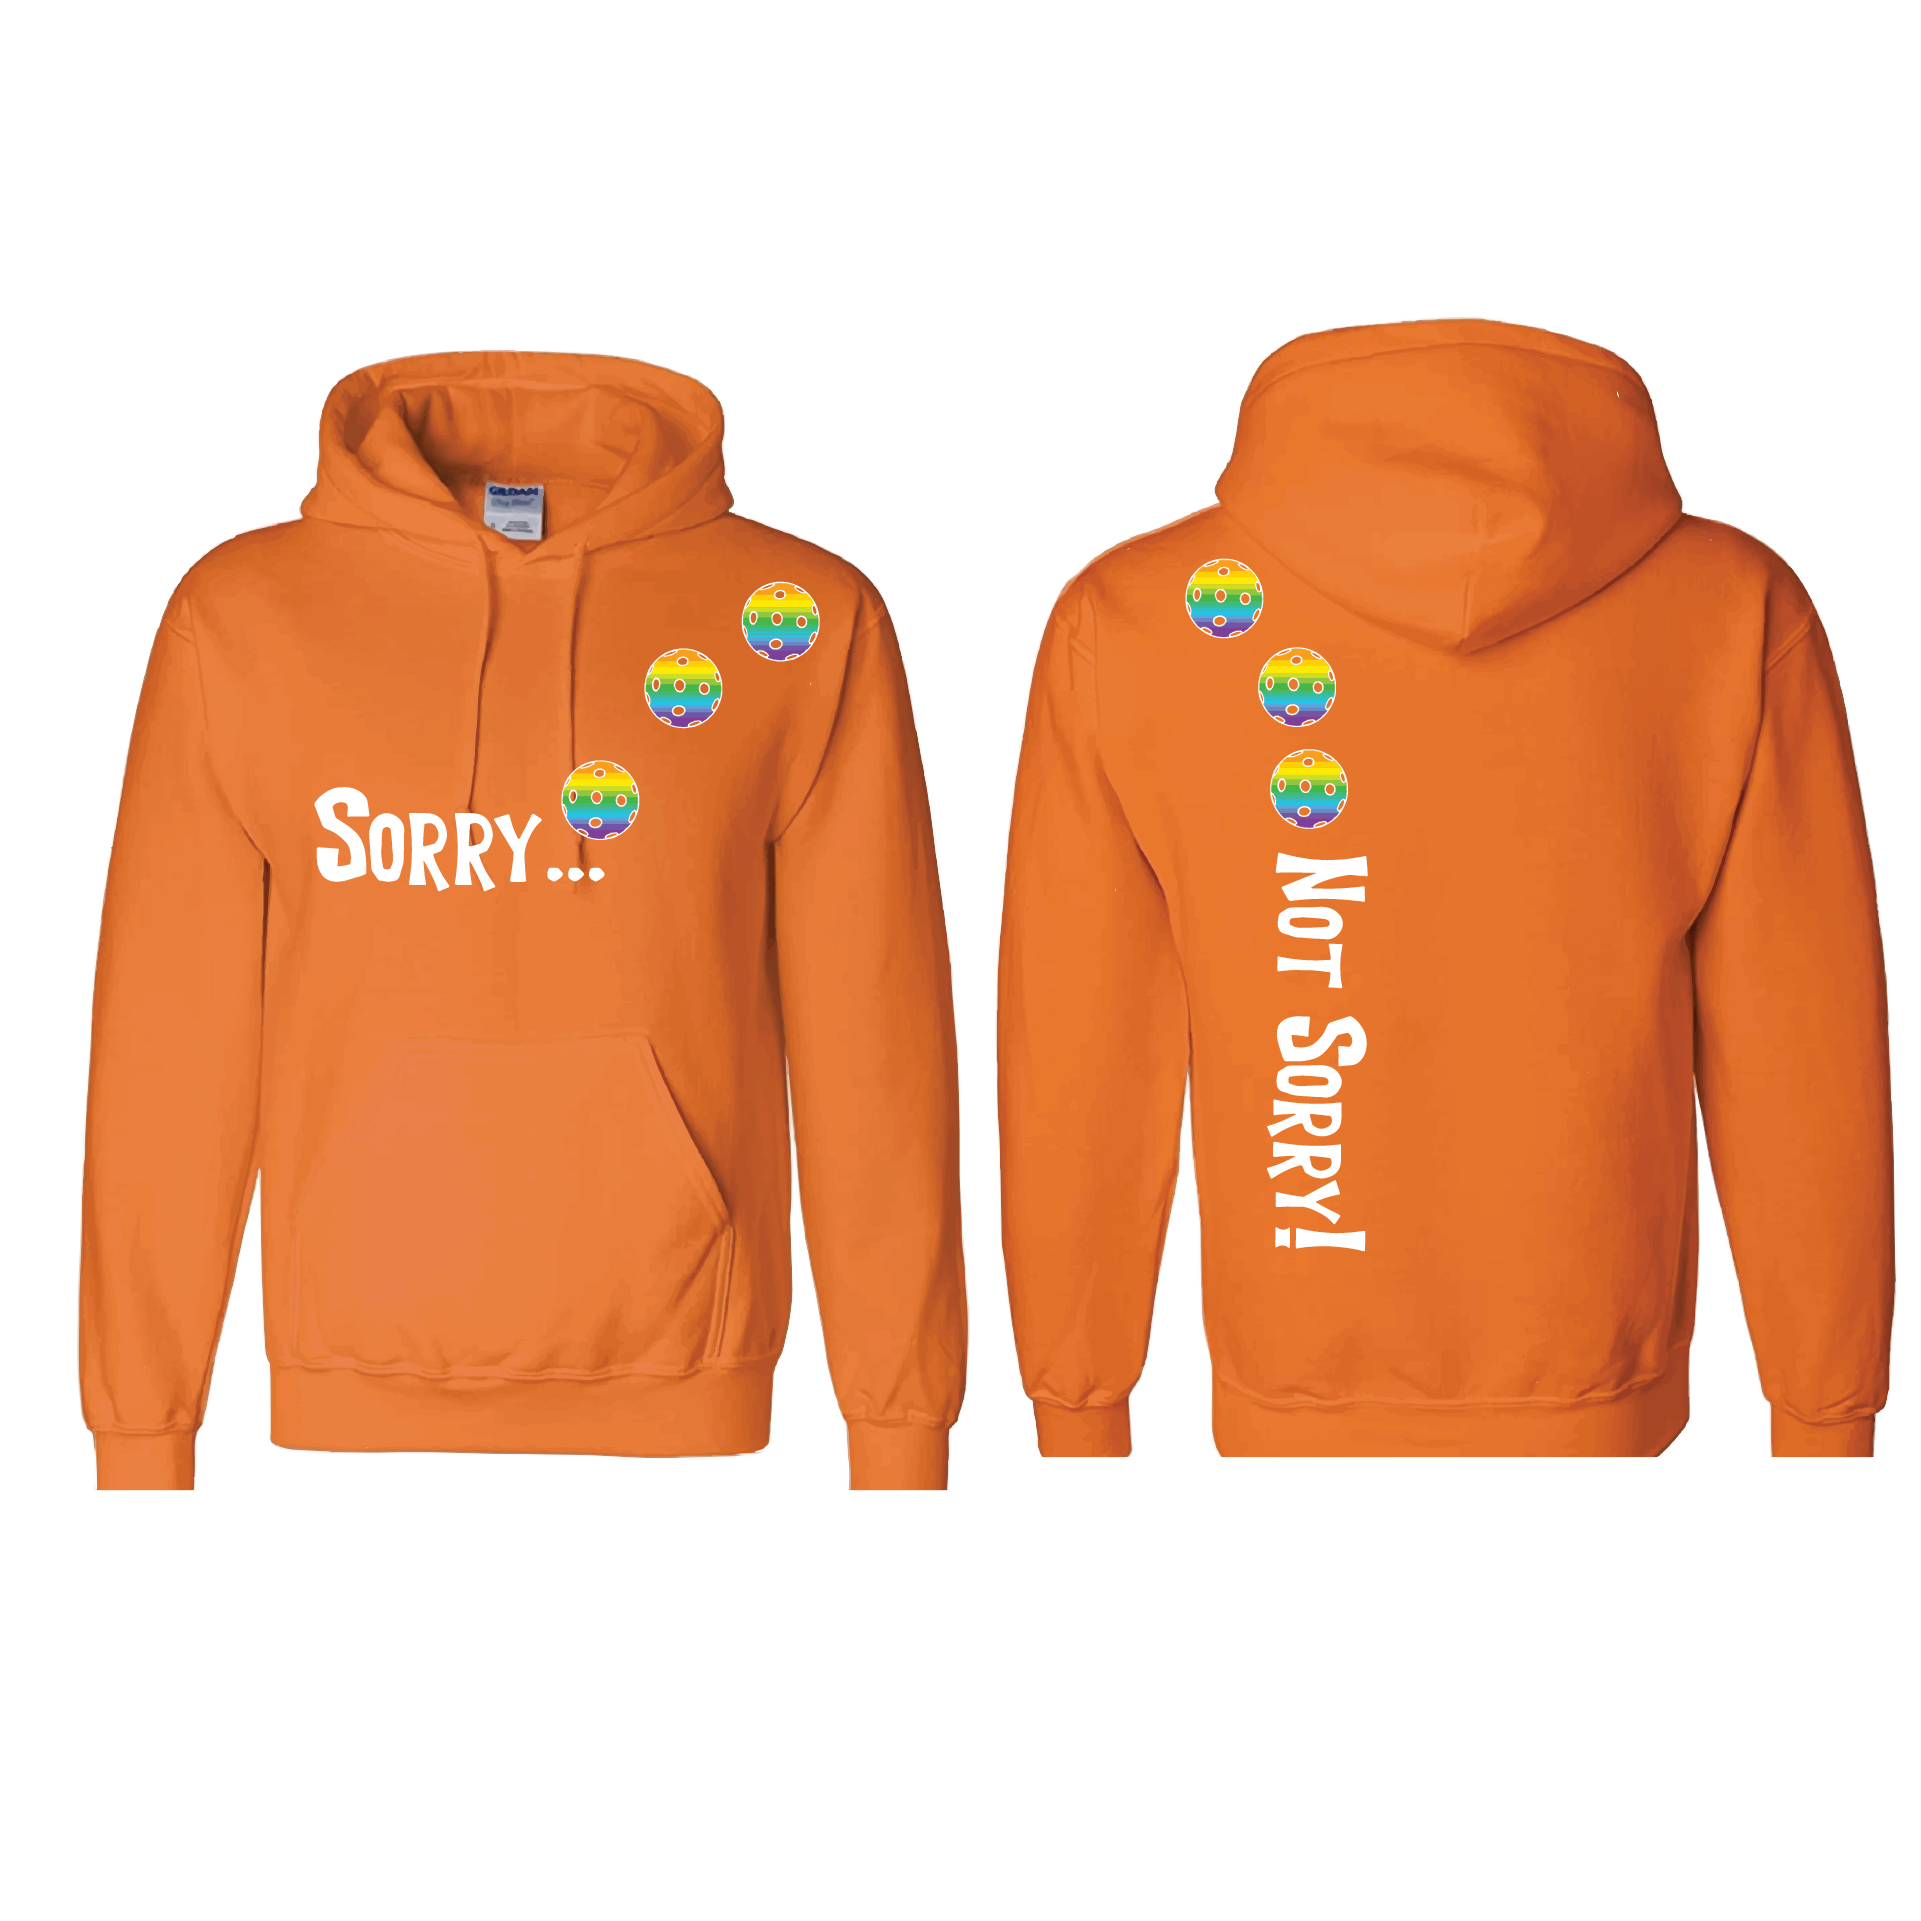 Design: Sorry...Not Sorry!!! with Customizable Ball Color: Choose: Cyan, Orange, Purple or Rainbow Unisex Hooded Sweatshirt: Moisture-wicking, double-lined hood, front pouch pocket. This unisex hooded sweatshirt is comfortable and soft. Stay warm on the Pickleball courts while being that hit with this one of kind design.